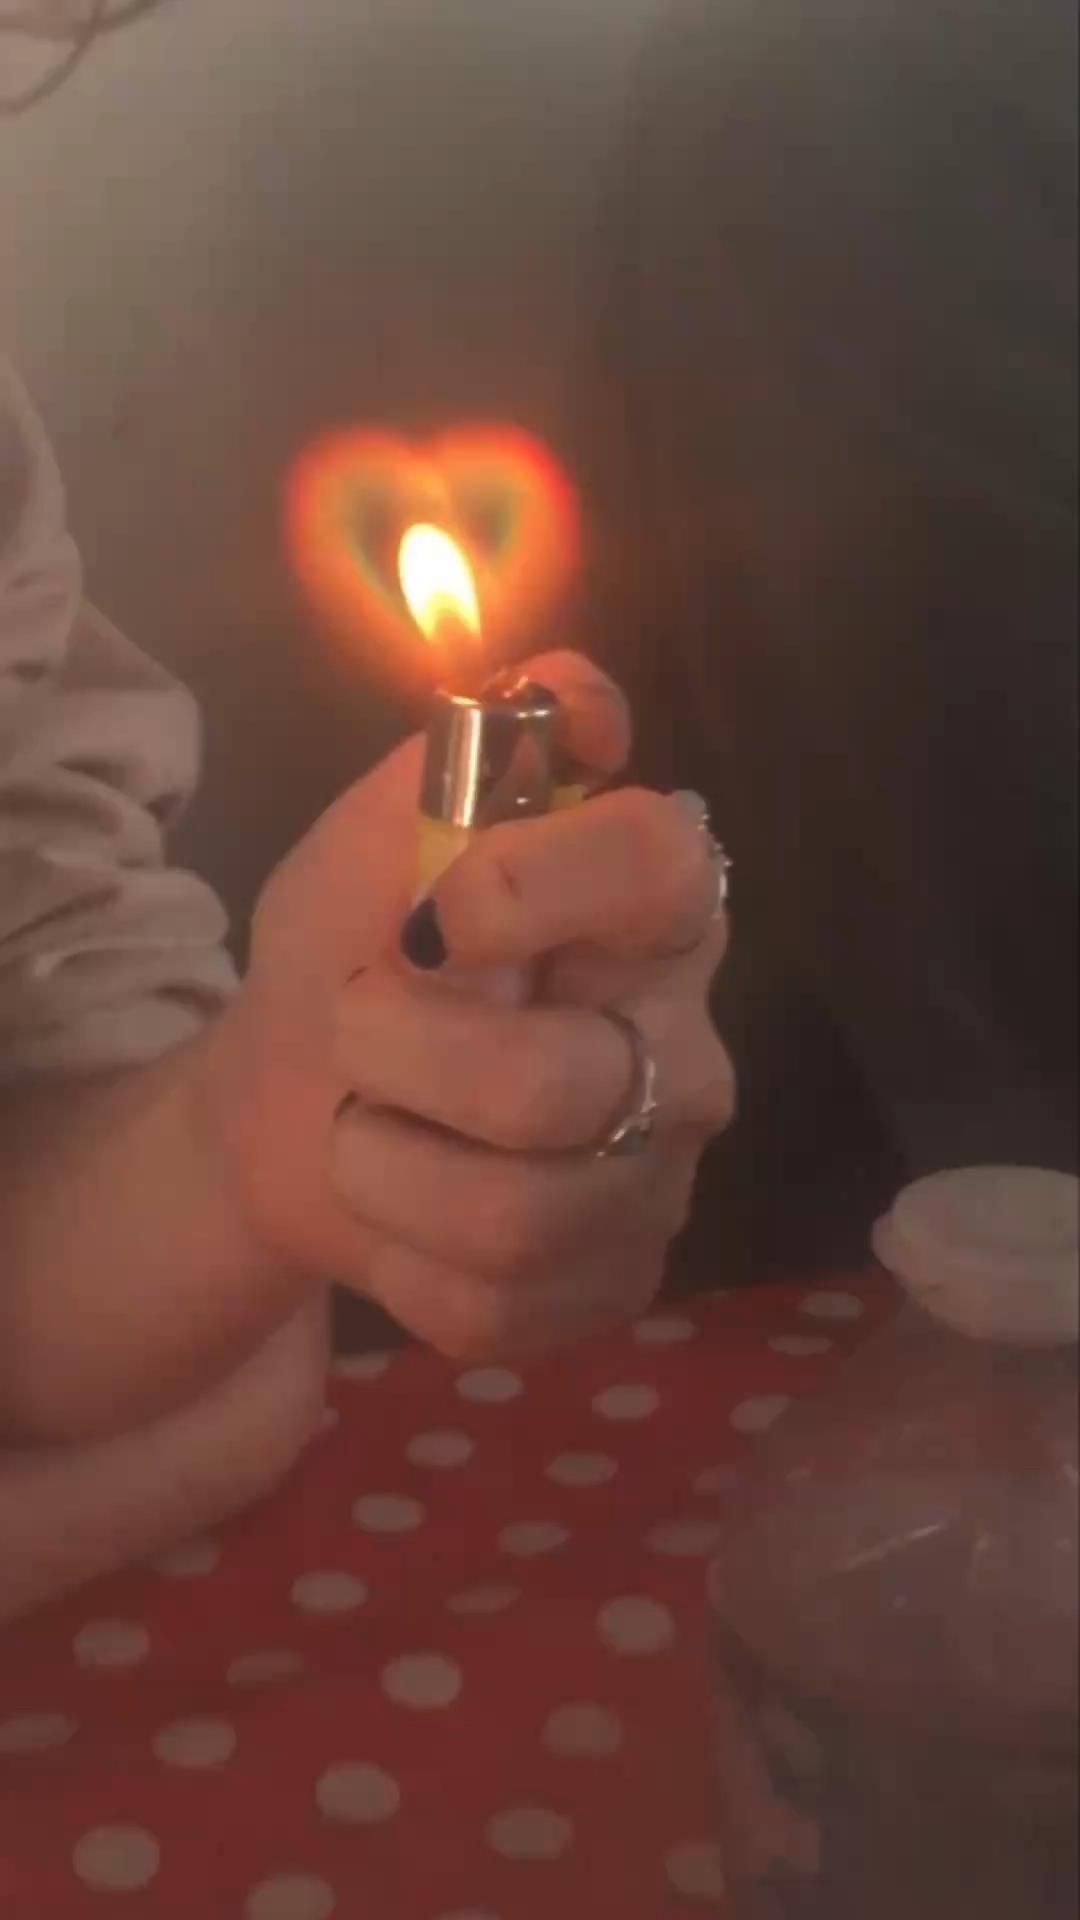 A person holding a lit lighter - Lovecore